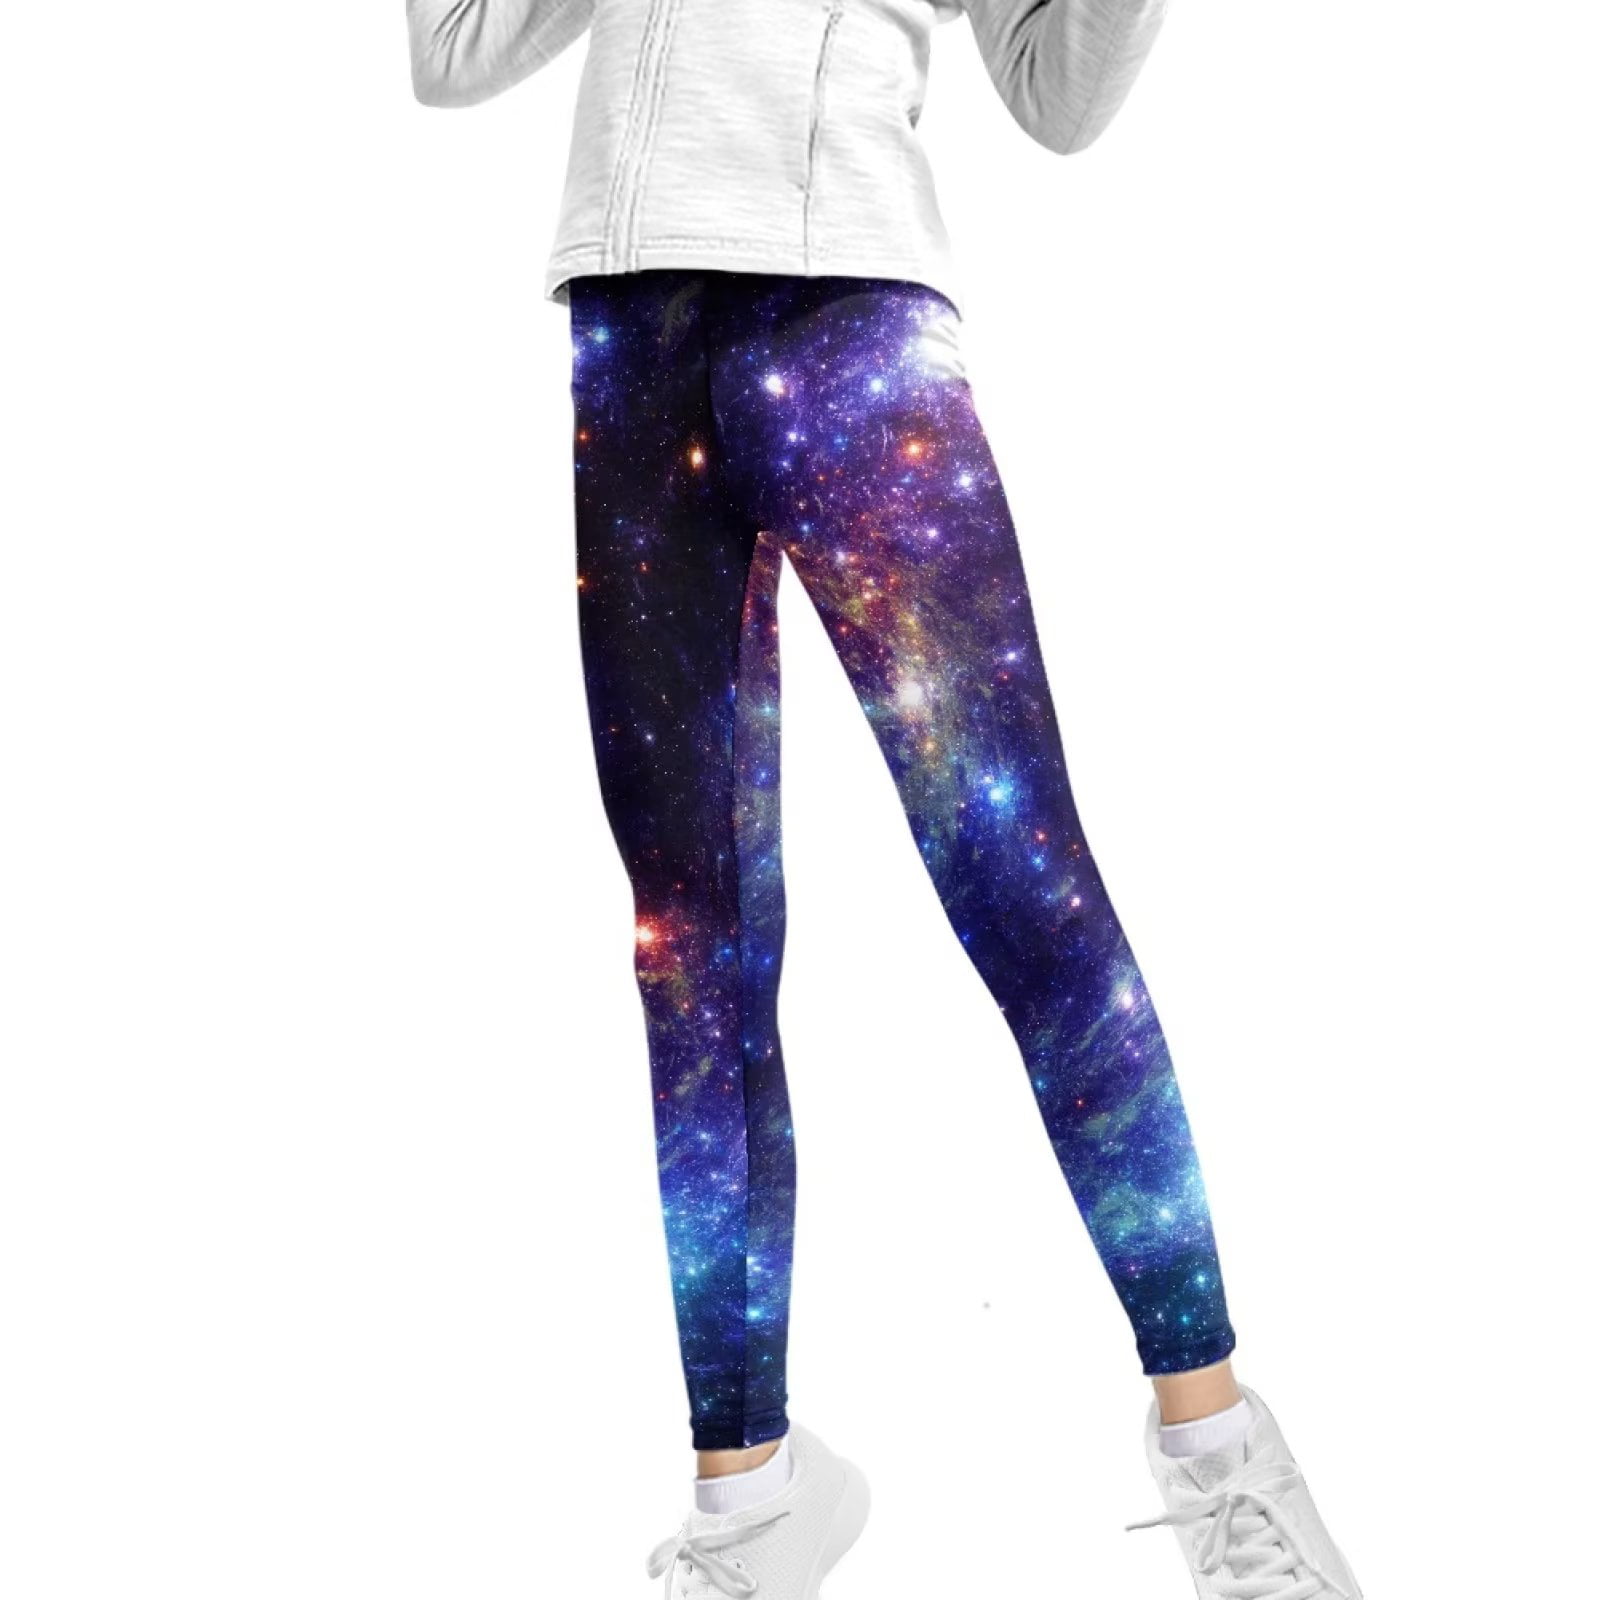 FKELYI Space Star Print Cool Kids Leggings Size 4-5 Years Stretchy Running  Tights Teen Girls Durable Travel Yoga Pants High Waisted Butt Lift